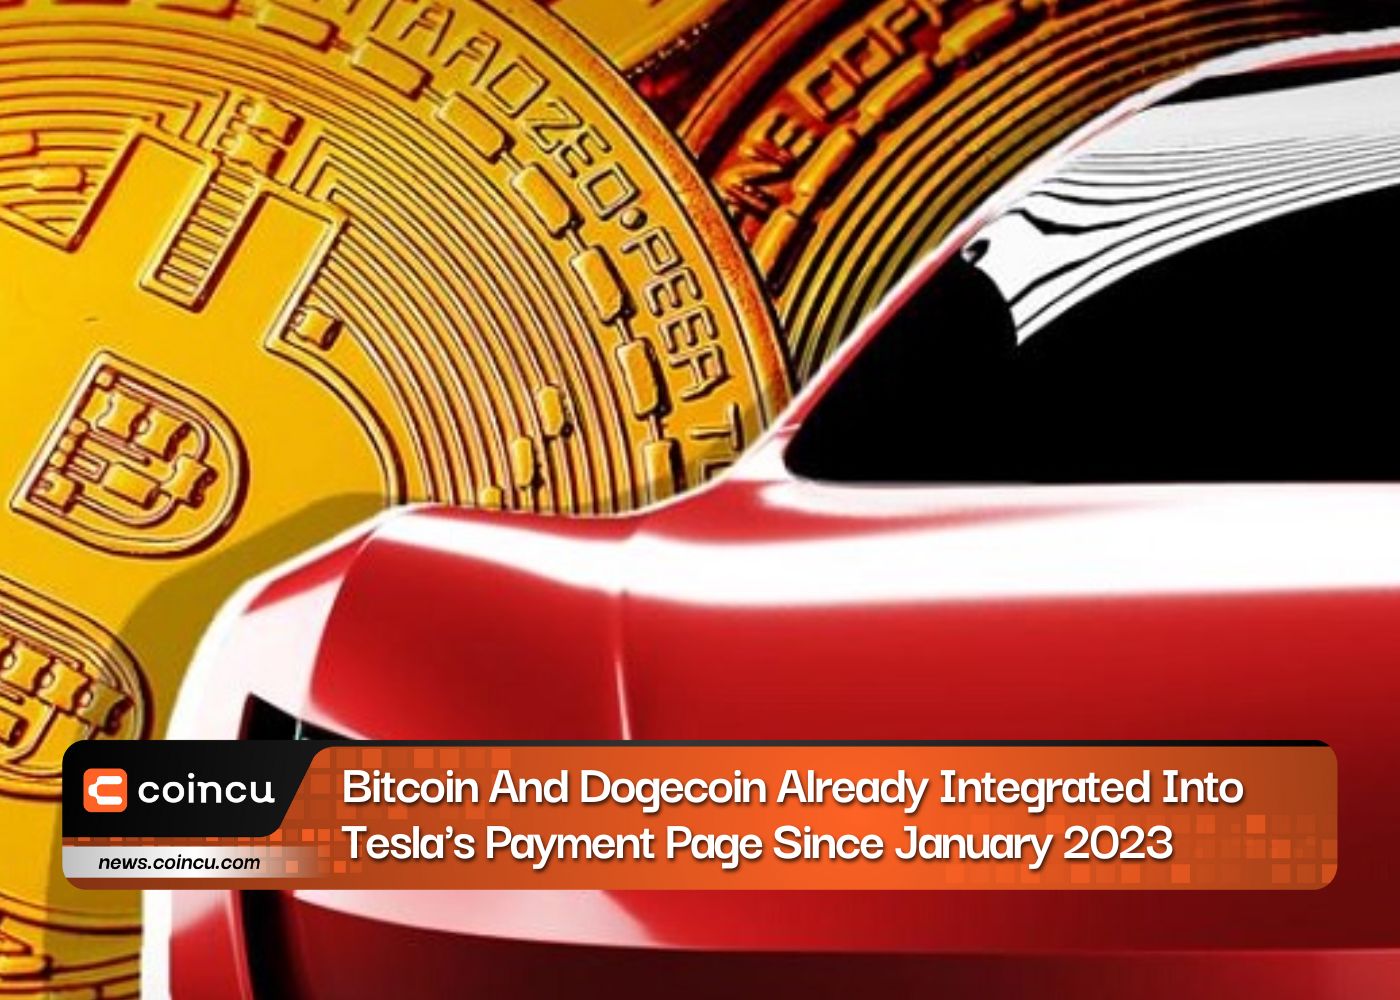 Bitcoin And Dogecoin Already Integrated Into Tesla's Payment Page Since January 2023